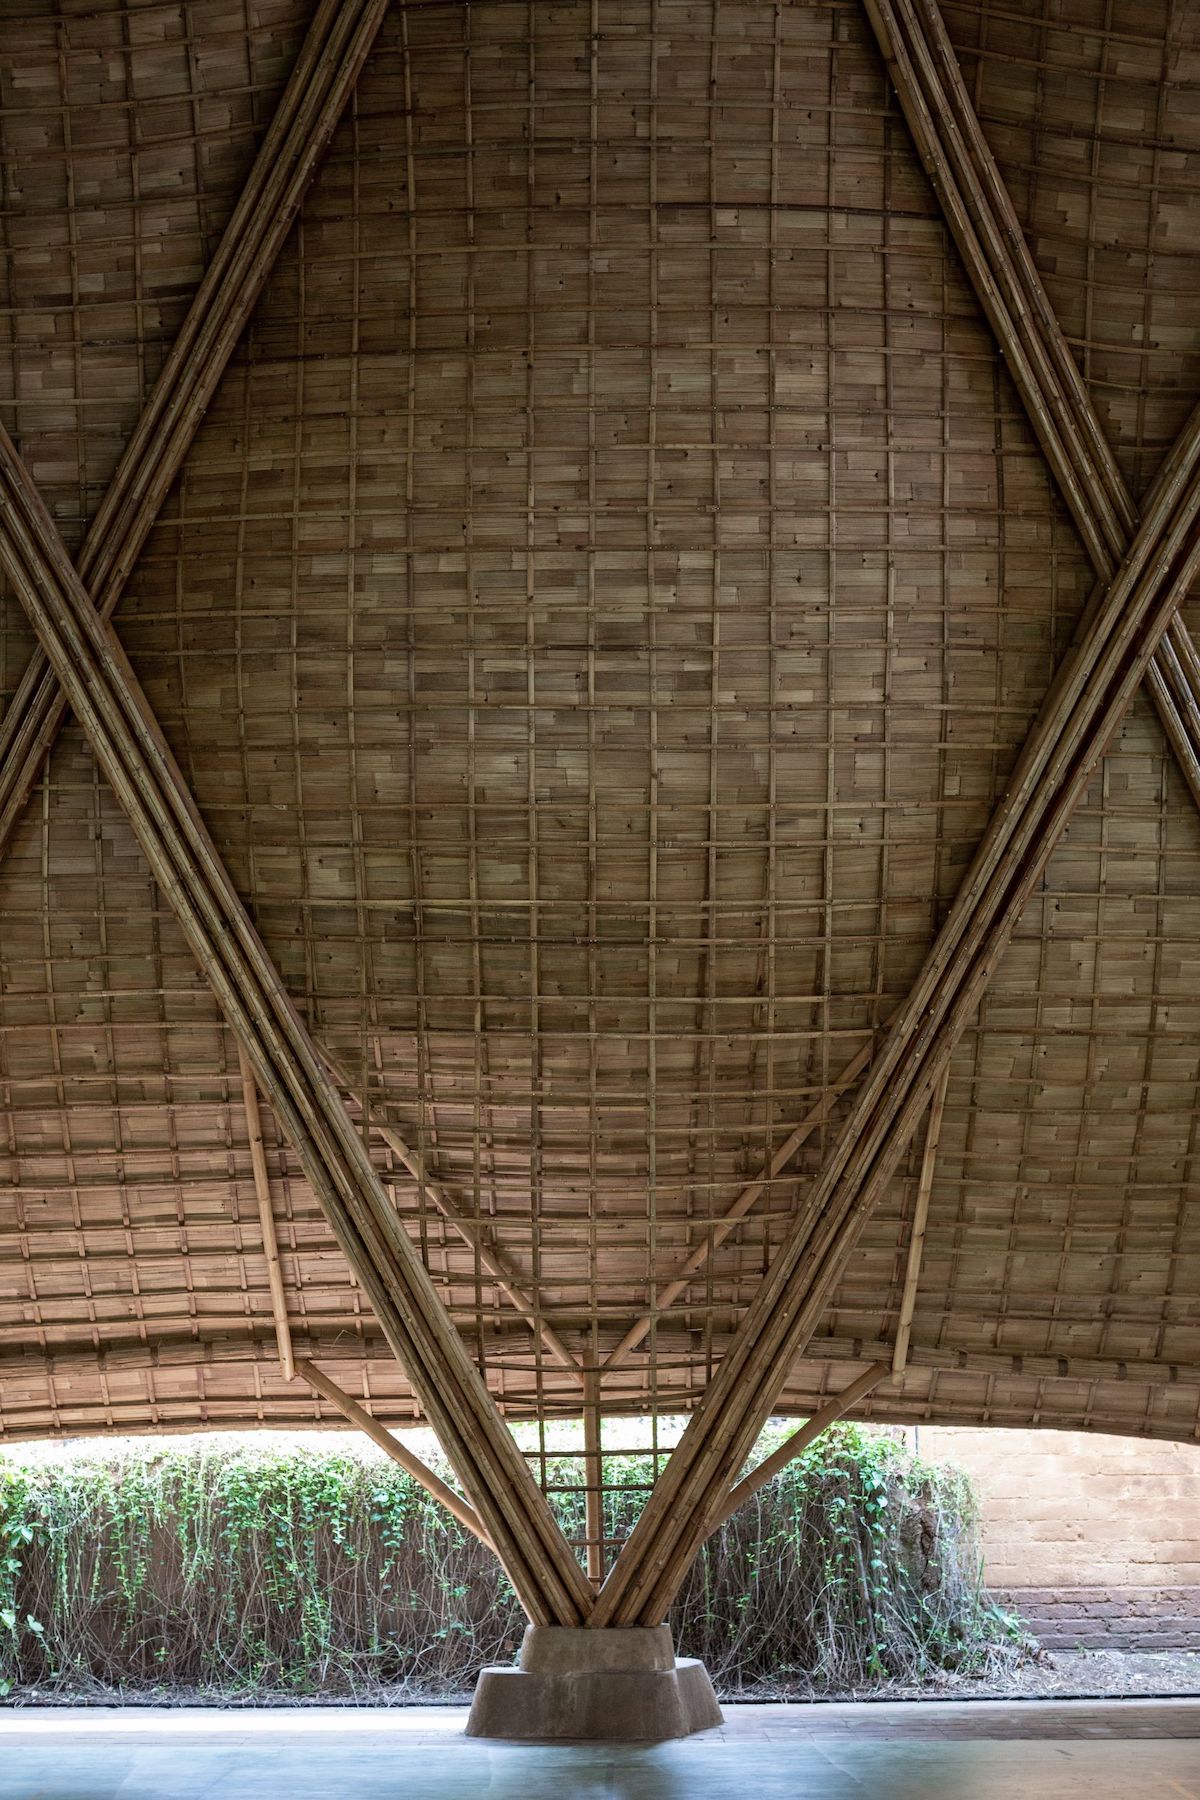 Interior Shot of The Arc at Green School in Bali, Indonesia